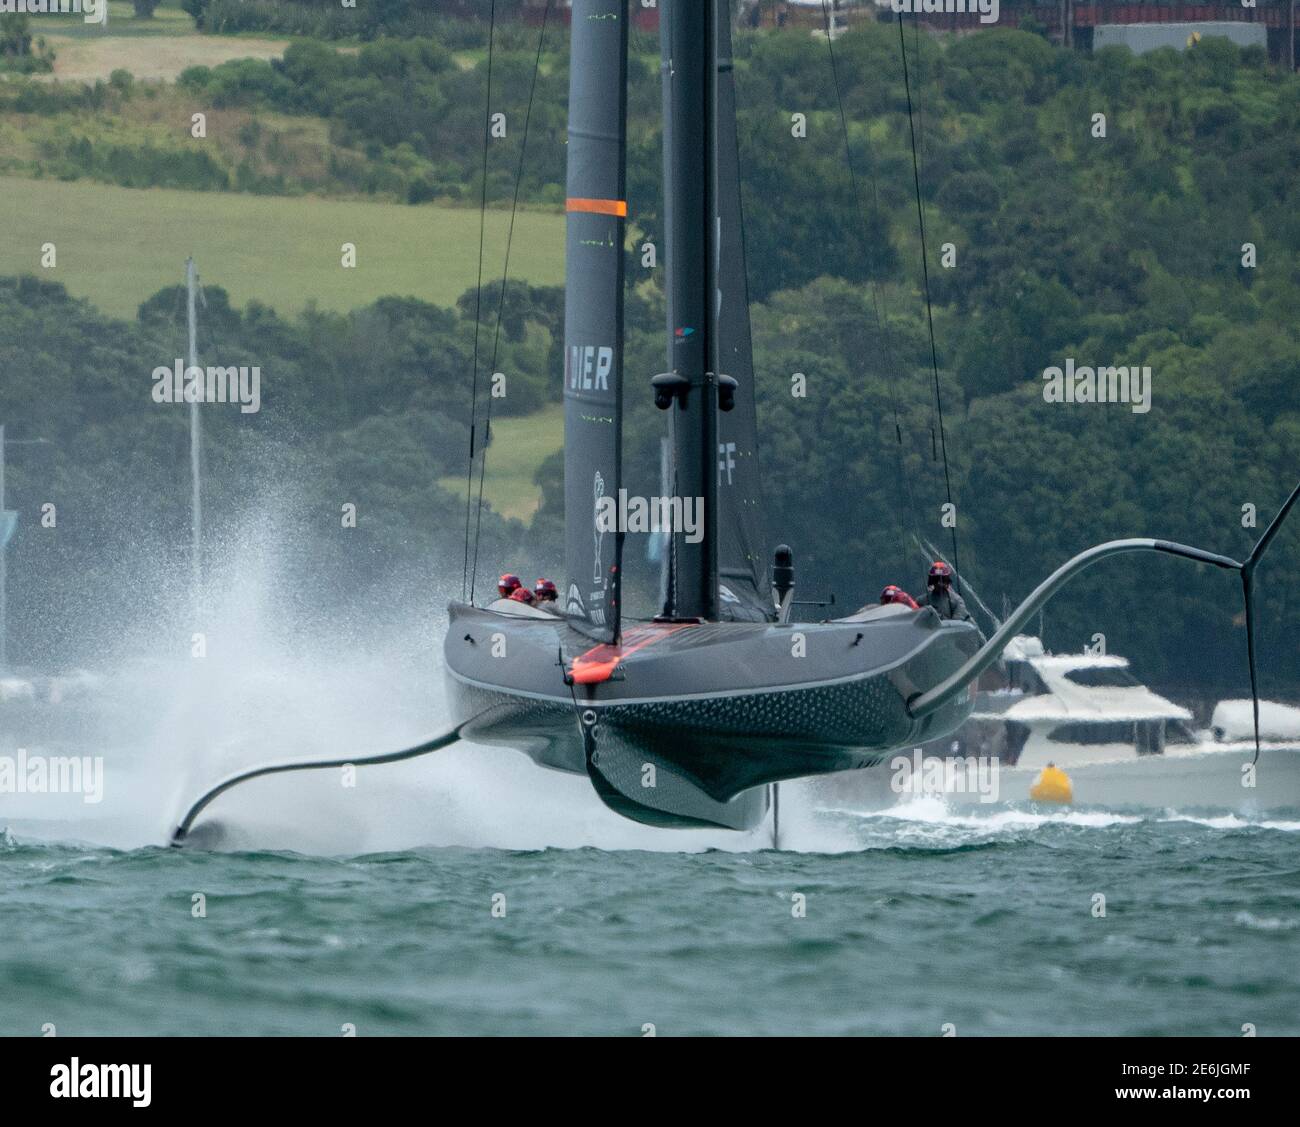 Auckland, New Zealand, 29 January, 2021 -  Sir Ben Ainslie, on the helm of INEOS Team UK's Britannia (right) as the team practice on the Waitemata Harbour ahead of the Prada Cup finals which start on February 12. They will race either Italian team Luna Rossa Prada Pirelli or New York Yacht Club American Magic who are currently competing in the semi-finals which started today. Credit: Rob Taggart/Alamy News Live Stock Photo